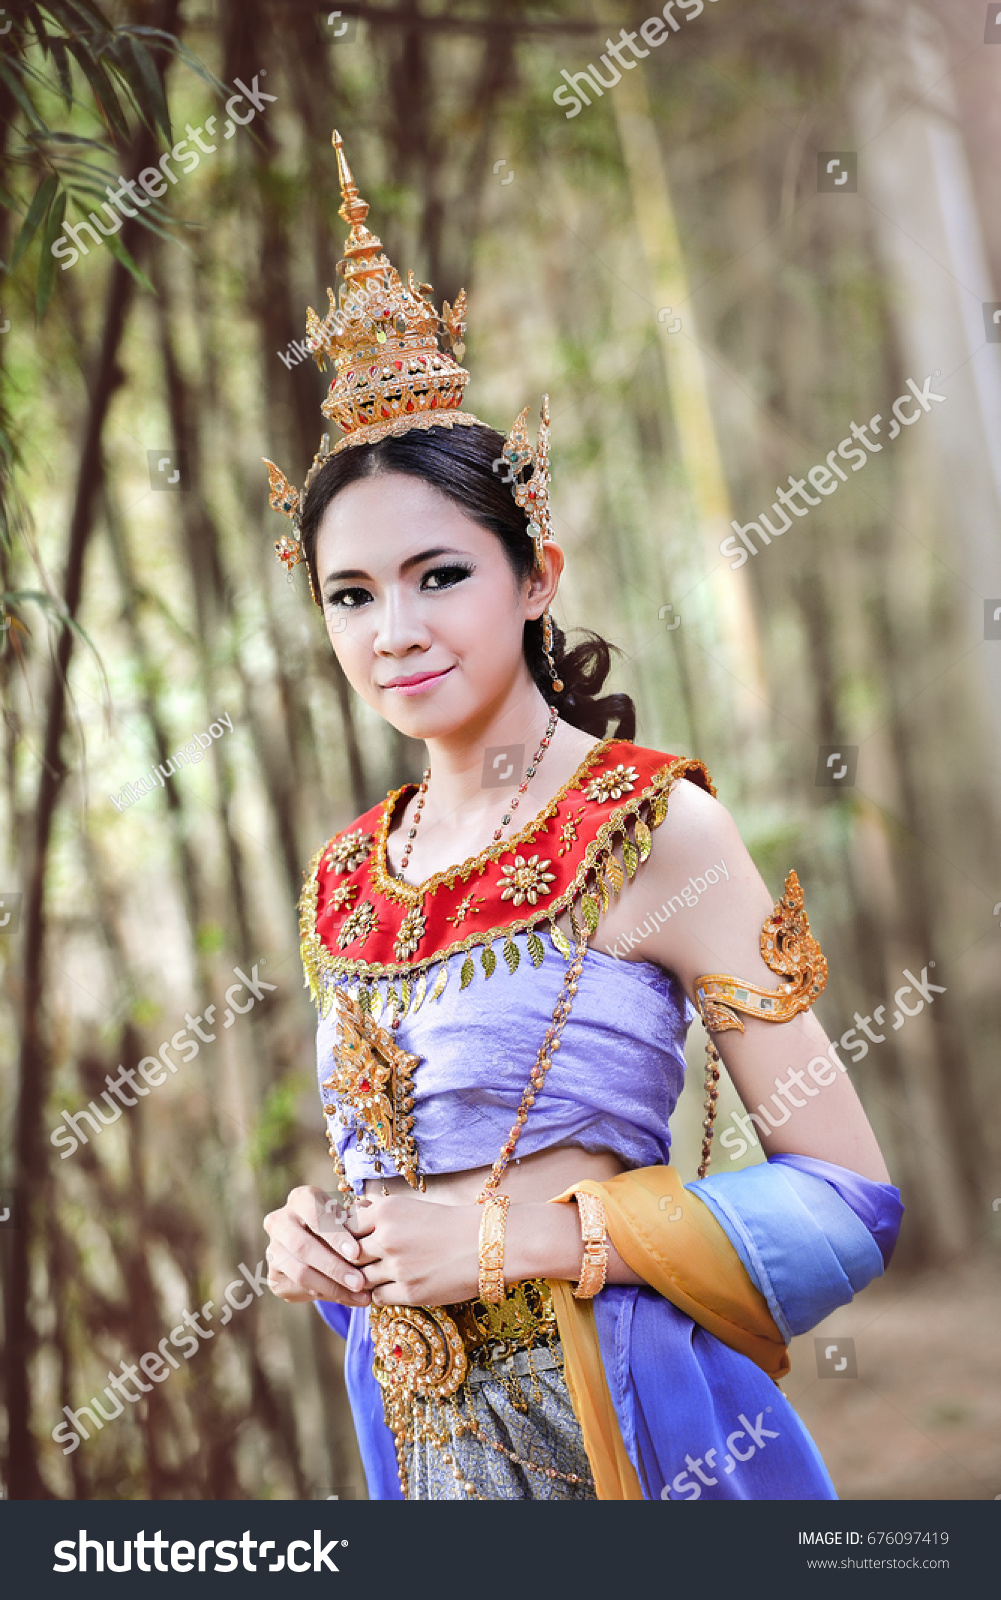 2,306 Thai traditional outfit Images, Stock Photos & Vectors | Shutterstock